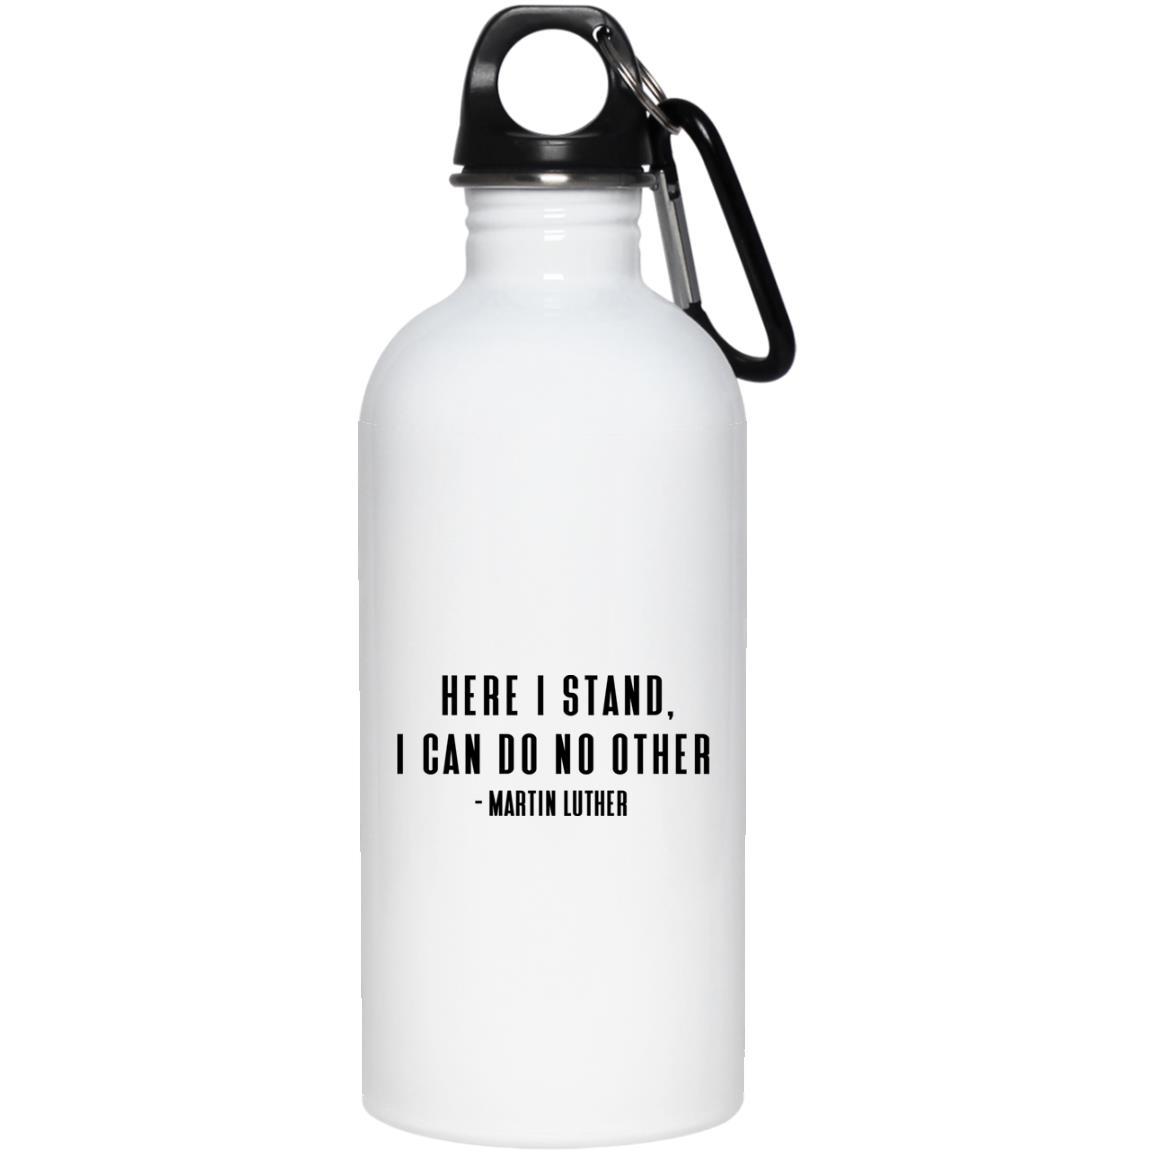 Here I Stand (20oz Steel Water Bottle) - SDG Clothing